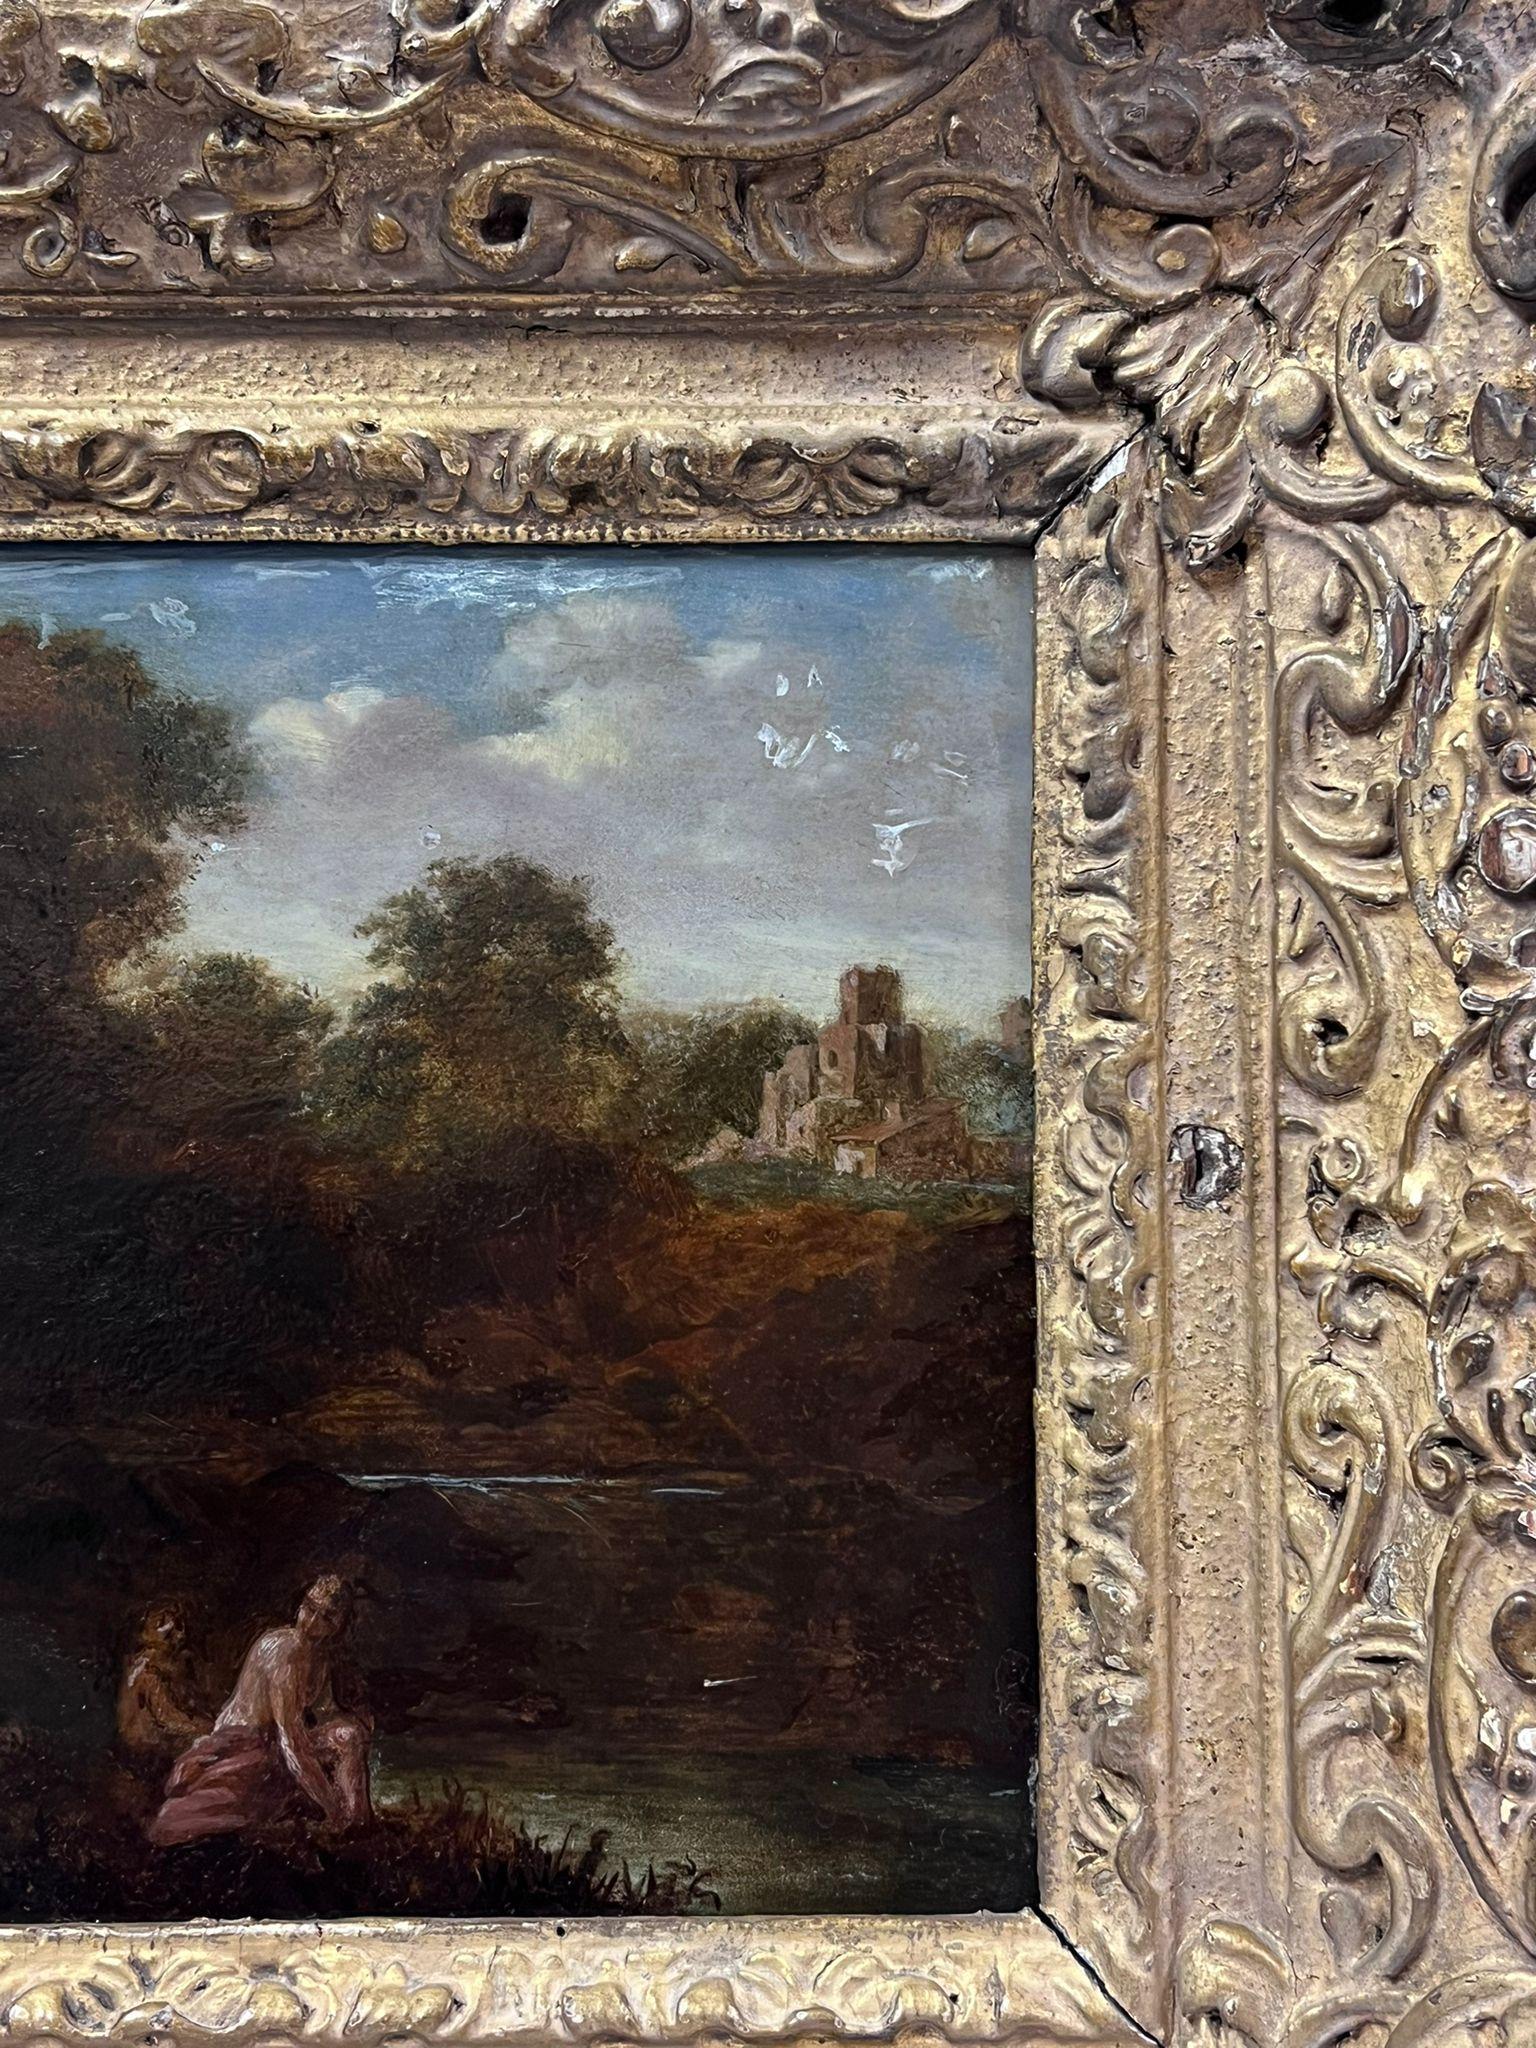 Bathers by the Woodland Pool
Dutch School, 17th century
circle of Cornelis van Poelenburgh (1594-1667)
oil on copper, framed
framed: 13 x 15 inches
copper: 7.5 x 9.5inches
provenance: private collection
condition: very good and sound condition for